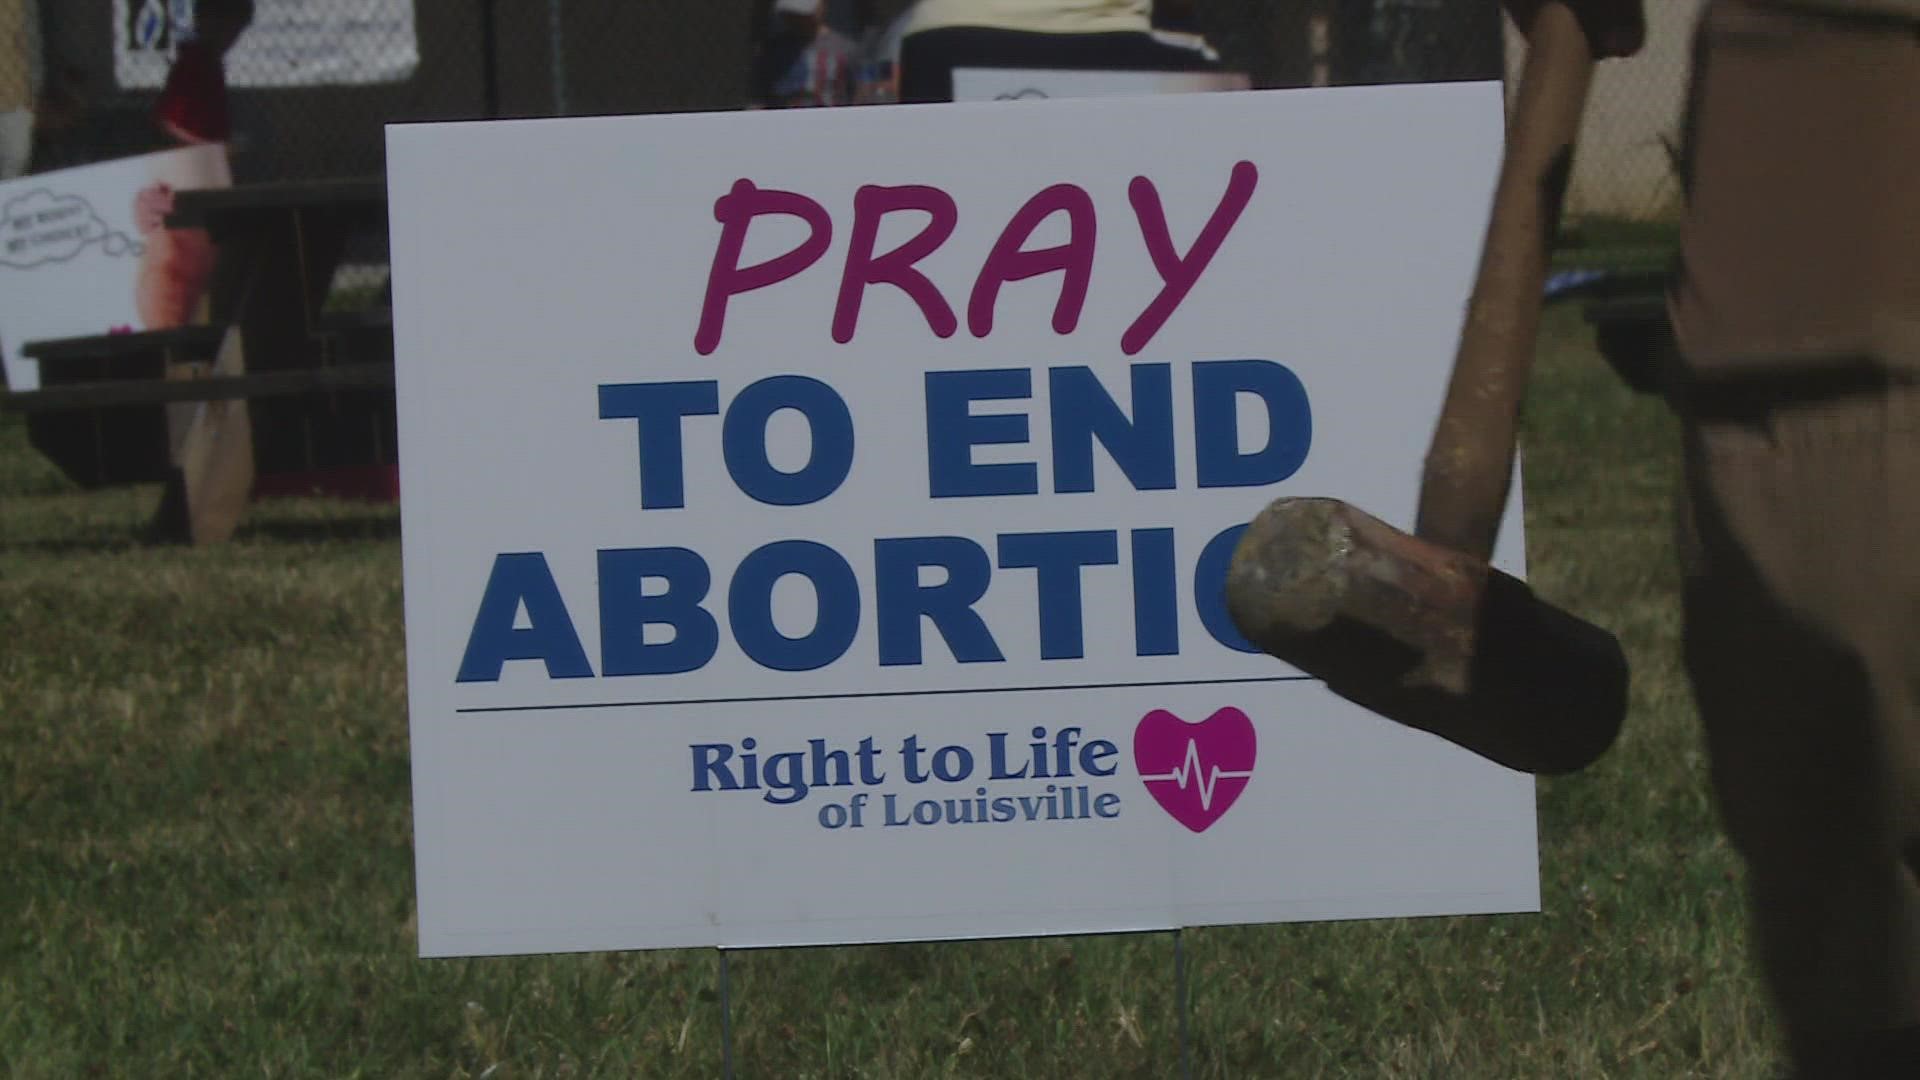 Right to Life Louisville had a rally planned weeks before the SCOTUS ruling. They said they are glad to have measures where there are less abortions.